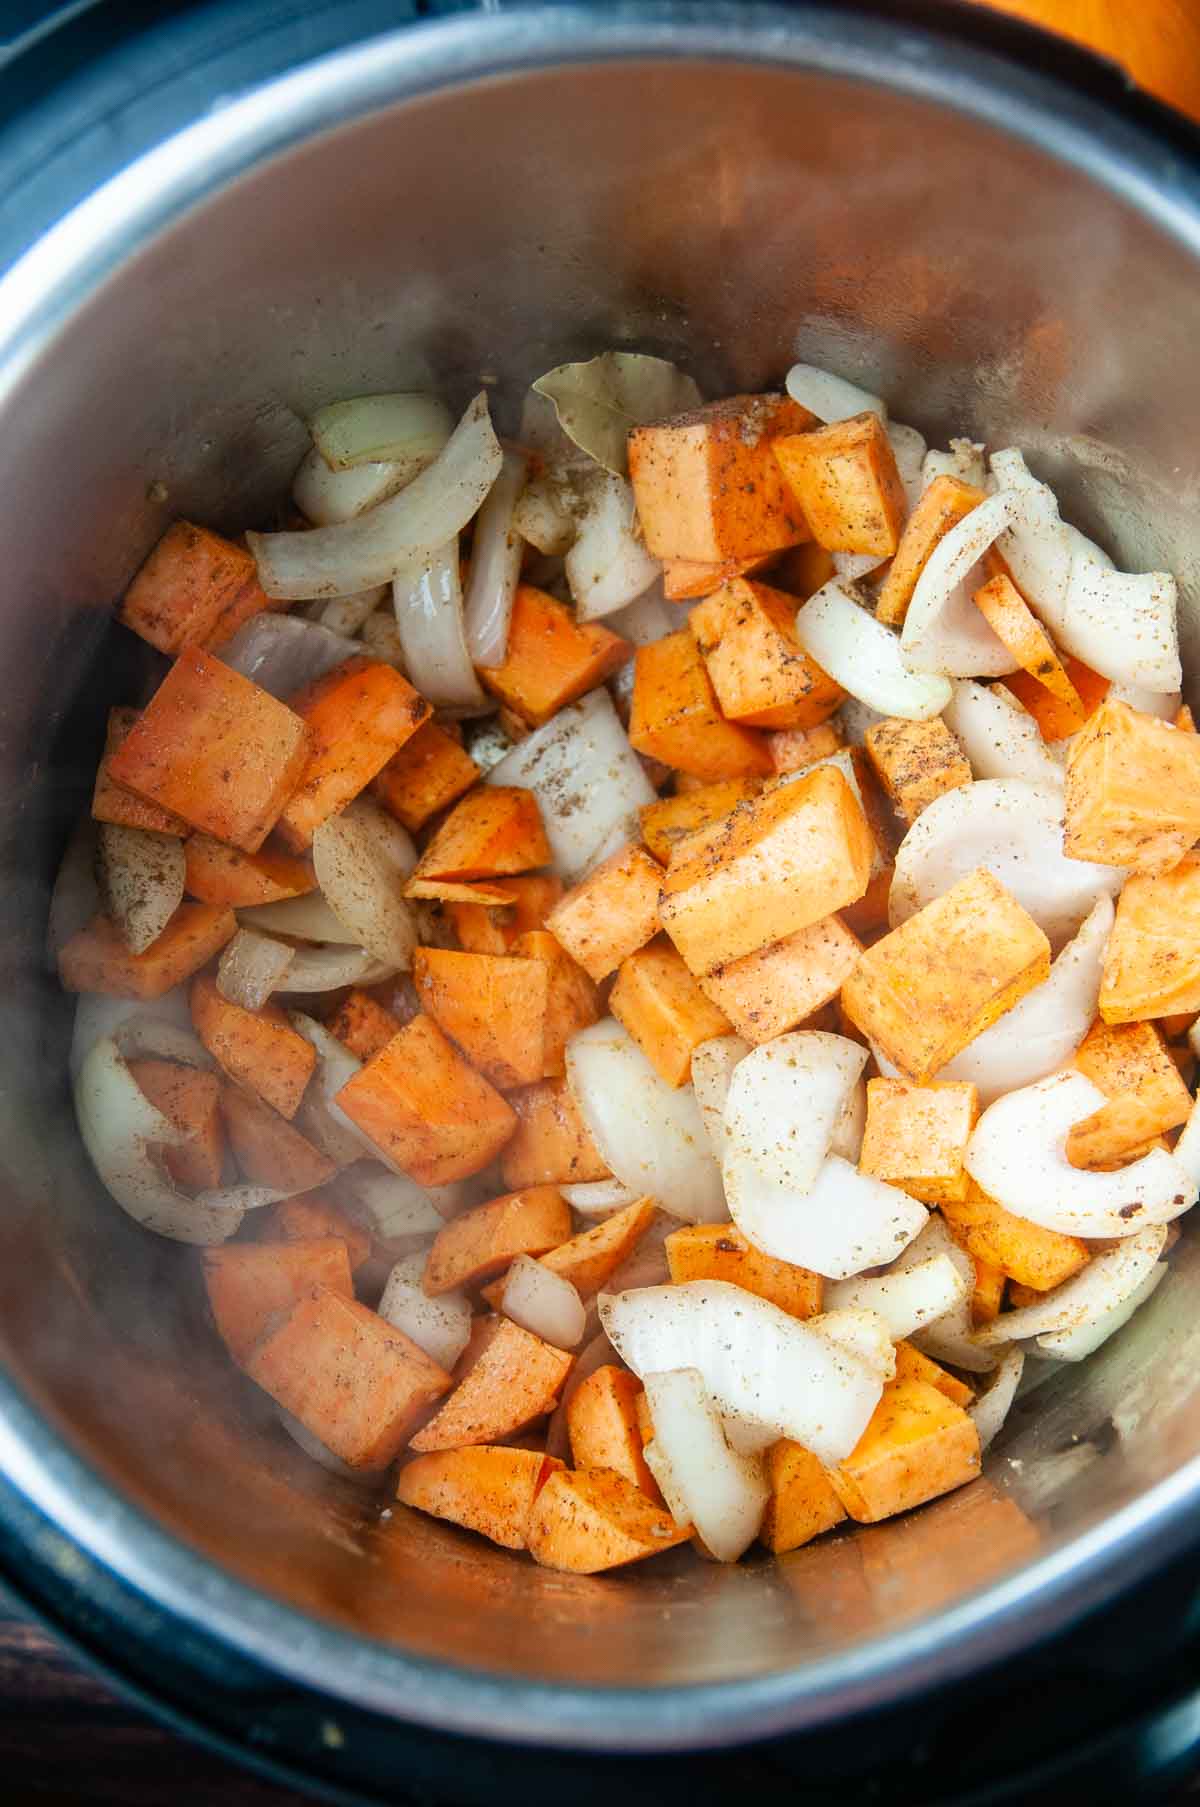 Saute the onions and sweet potato in the olive oil with spices